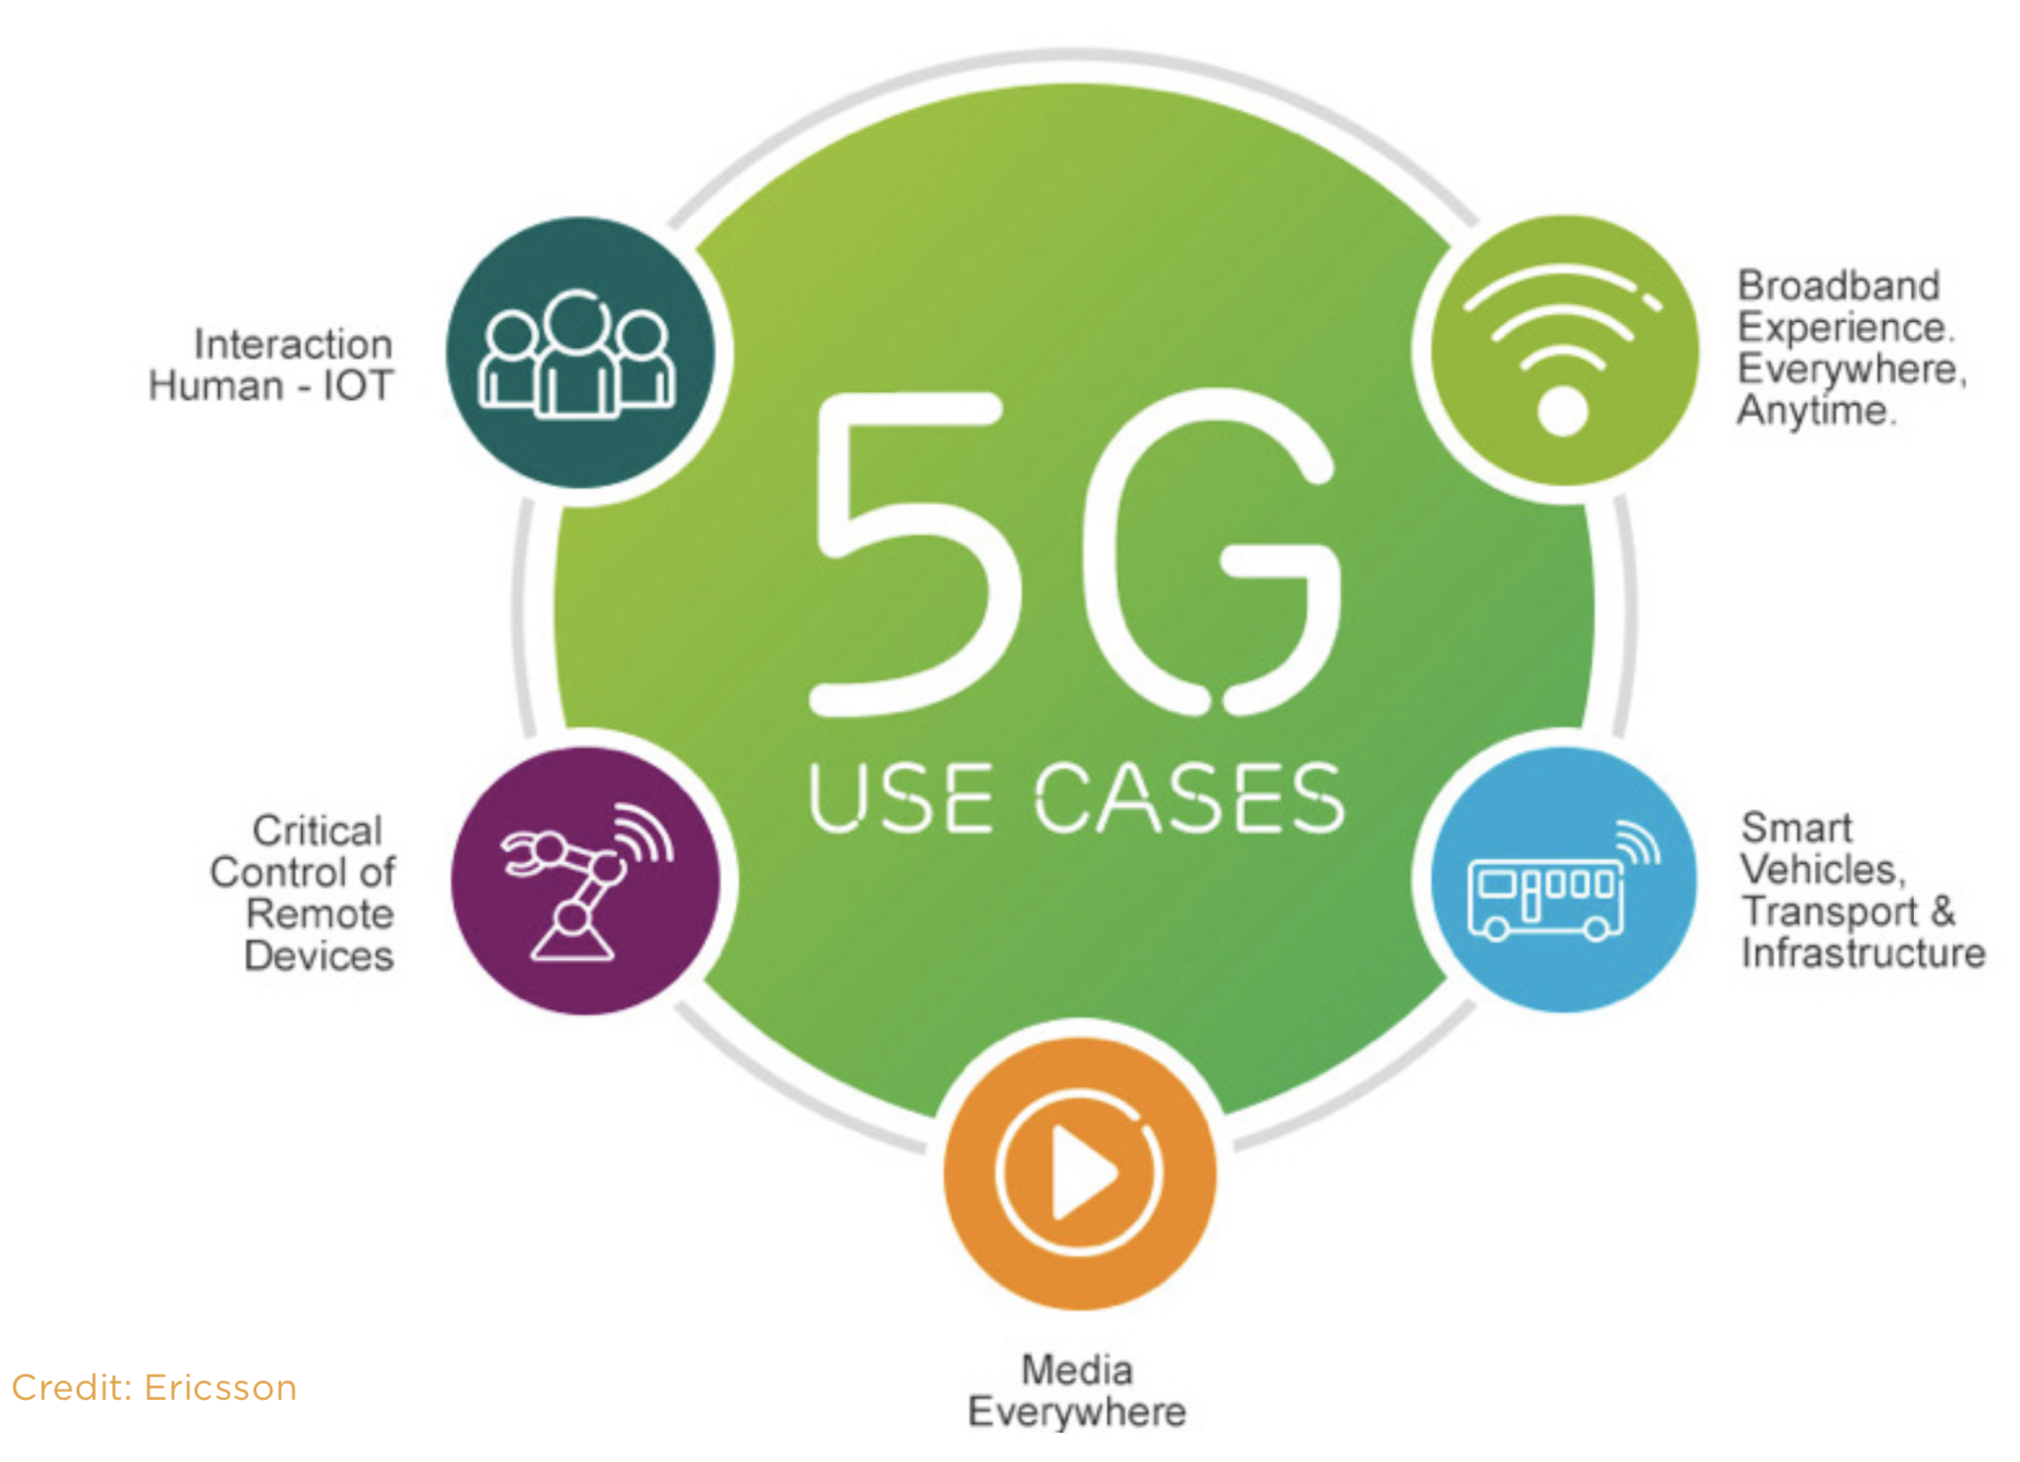 What-New-Services-Will-5G-Enable